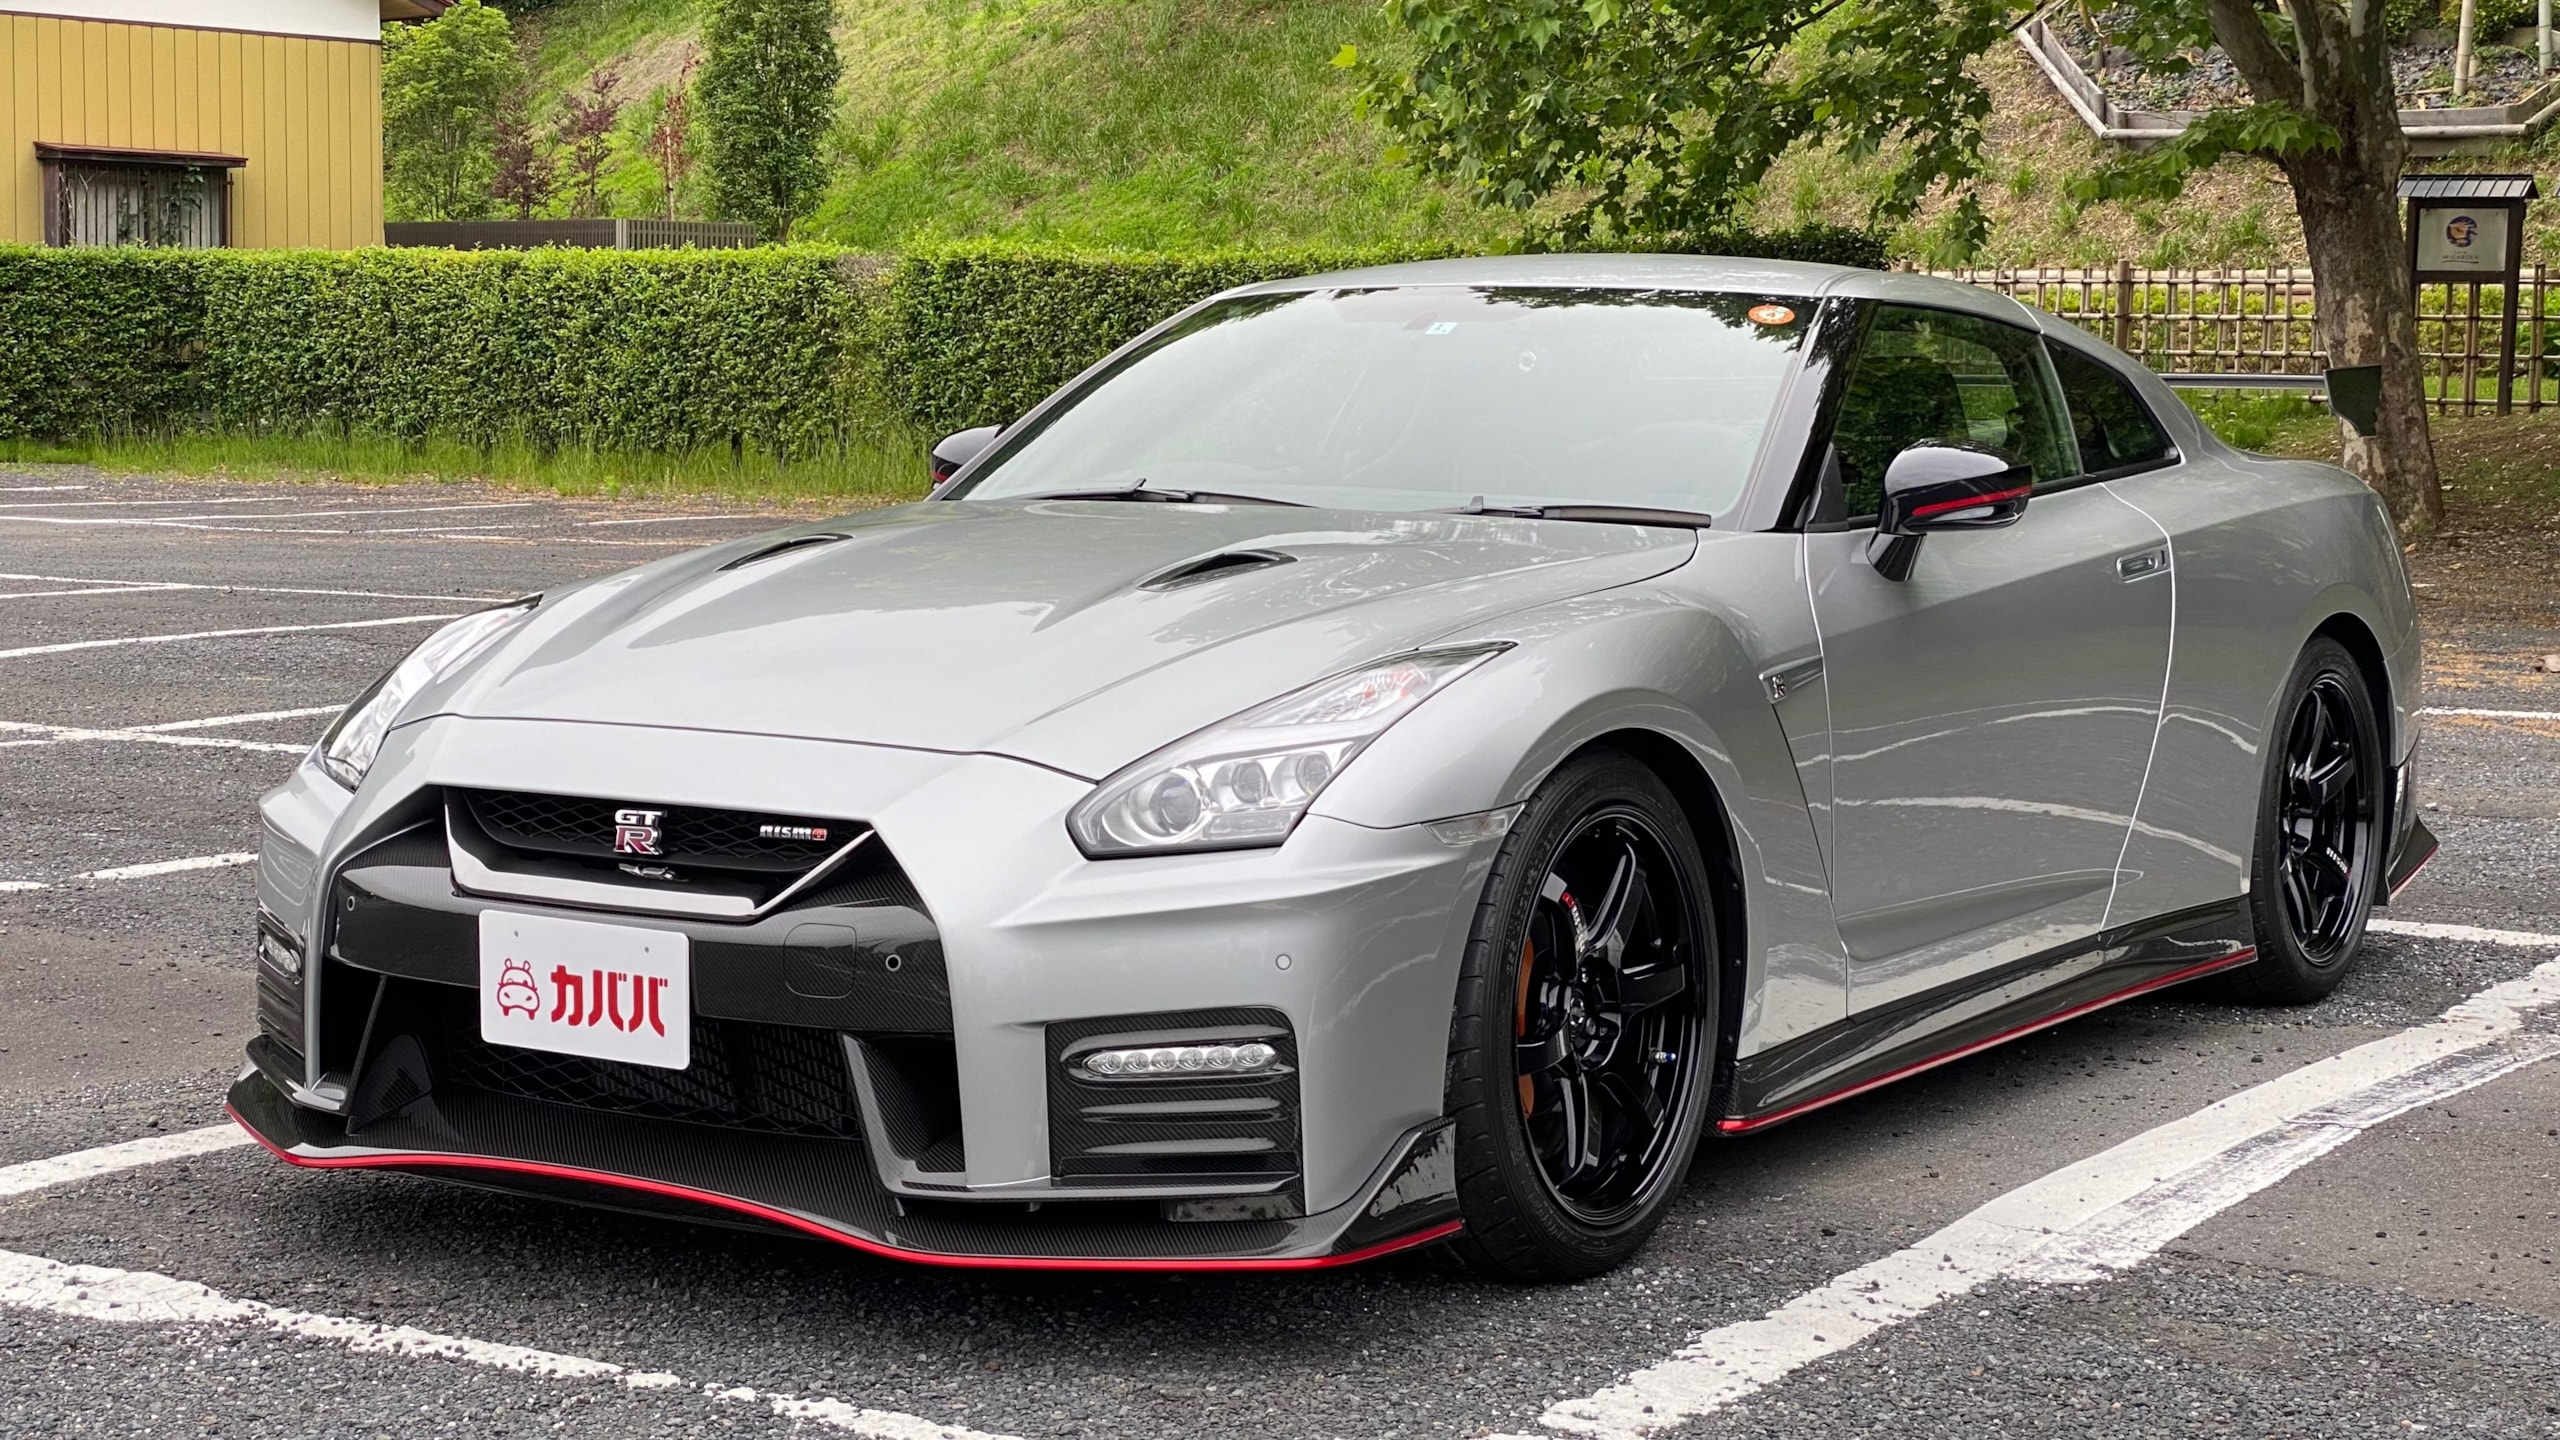 GT-R 3.8 NISMO 4WD(日産)2018年式 1950万円の中古車 - 自動車